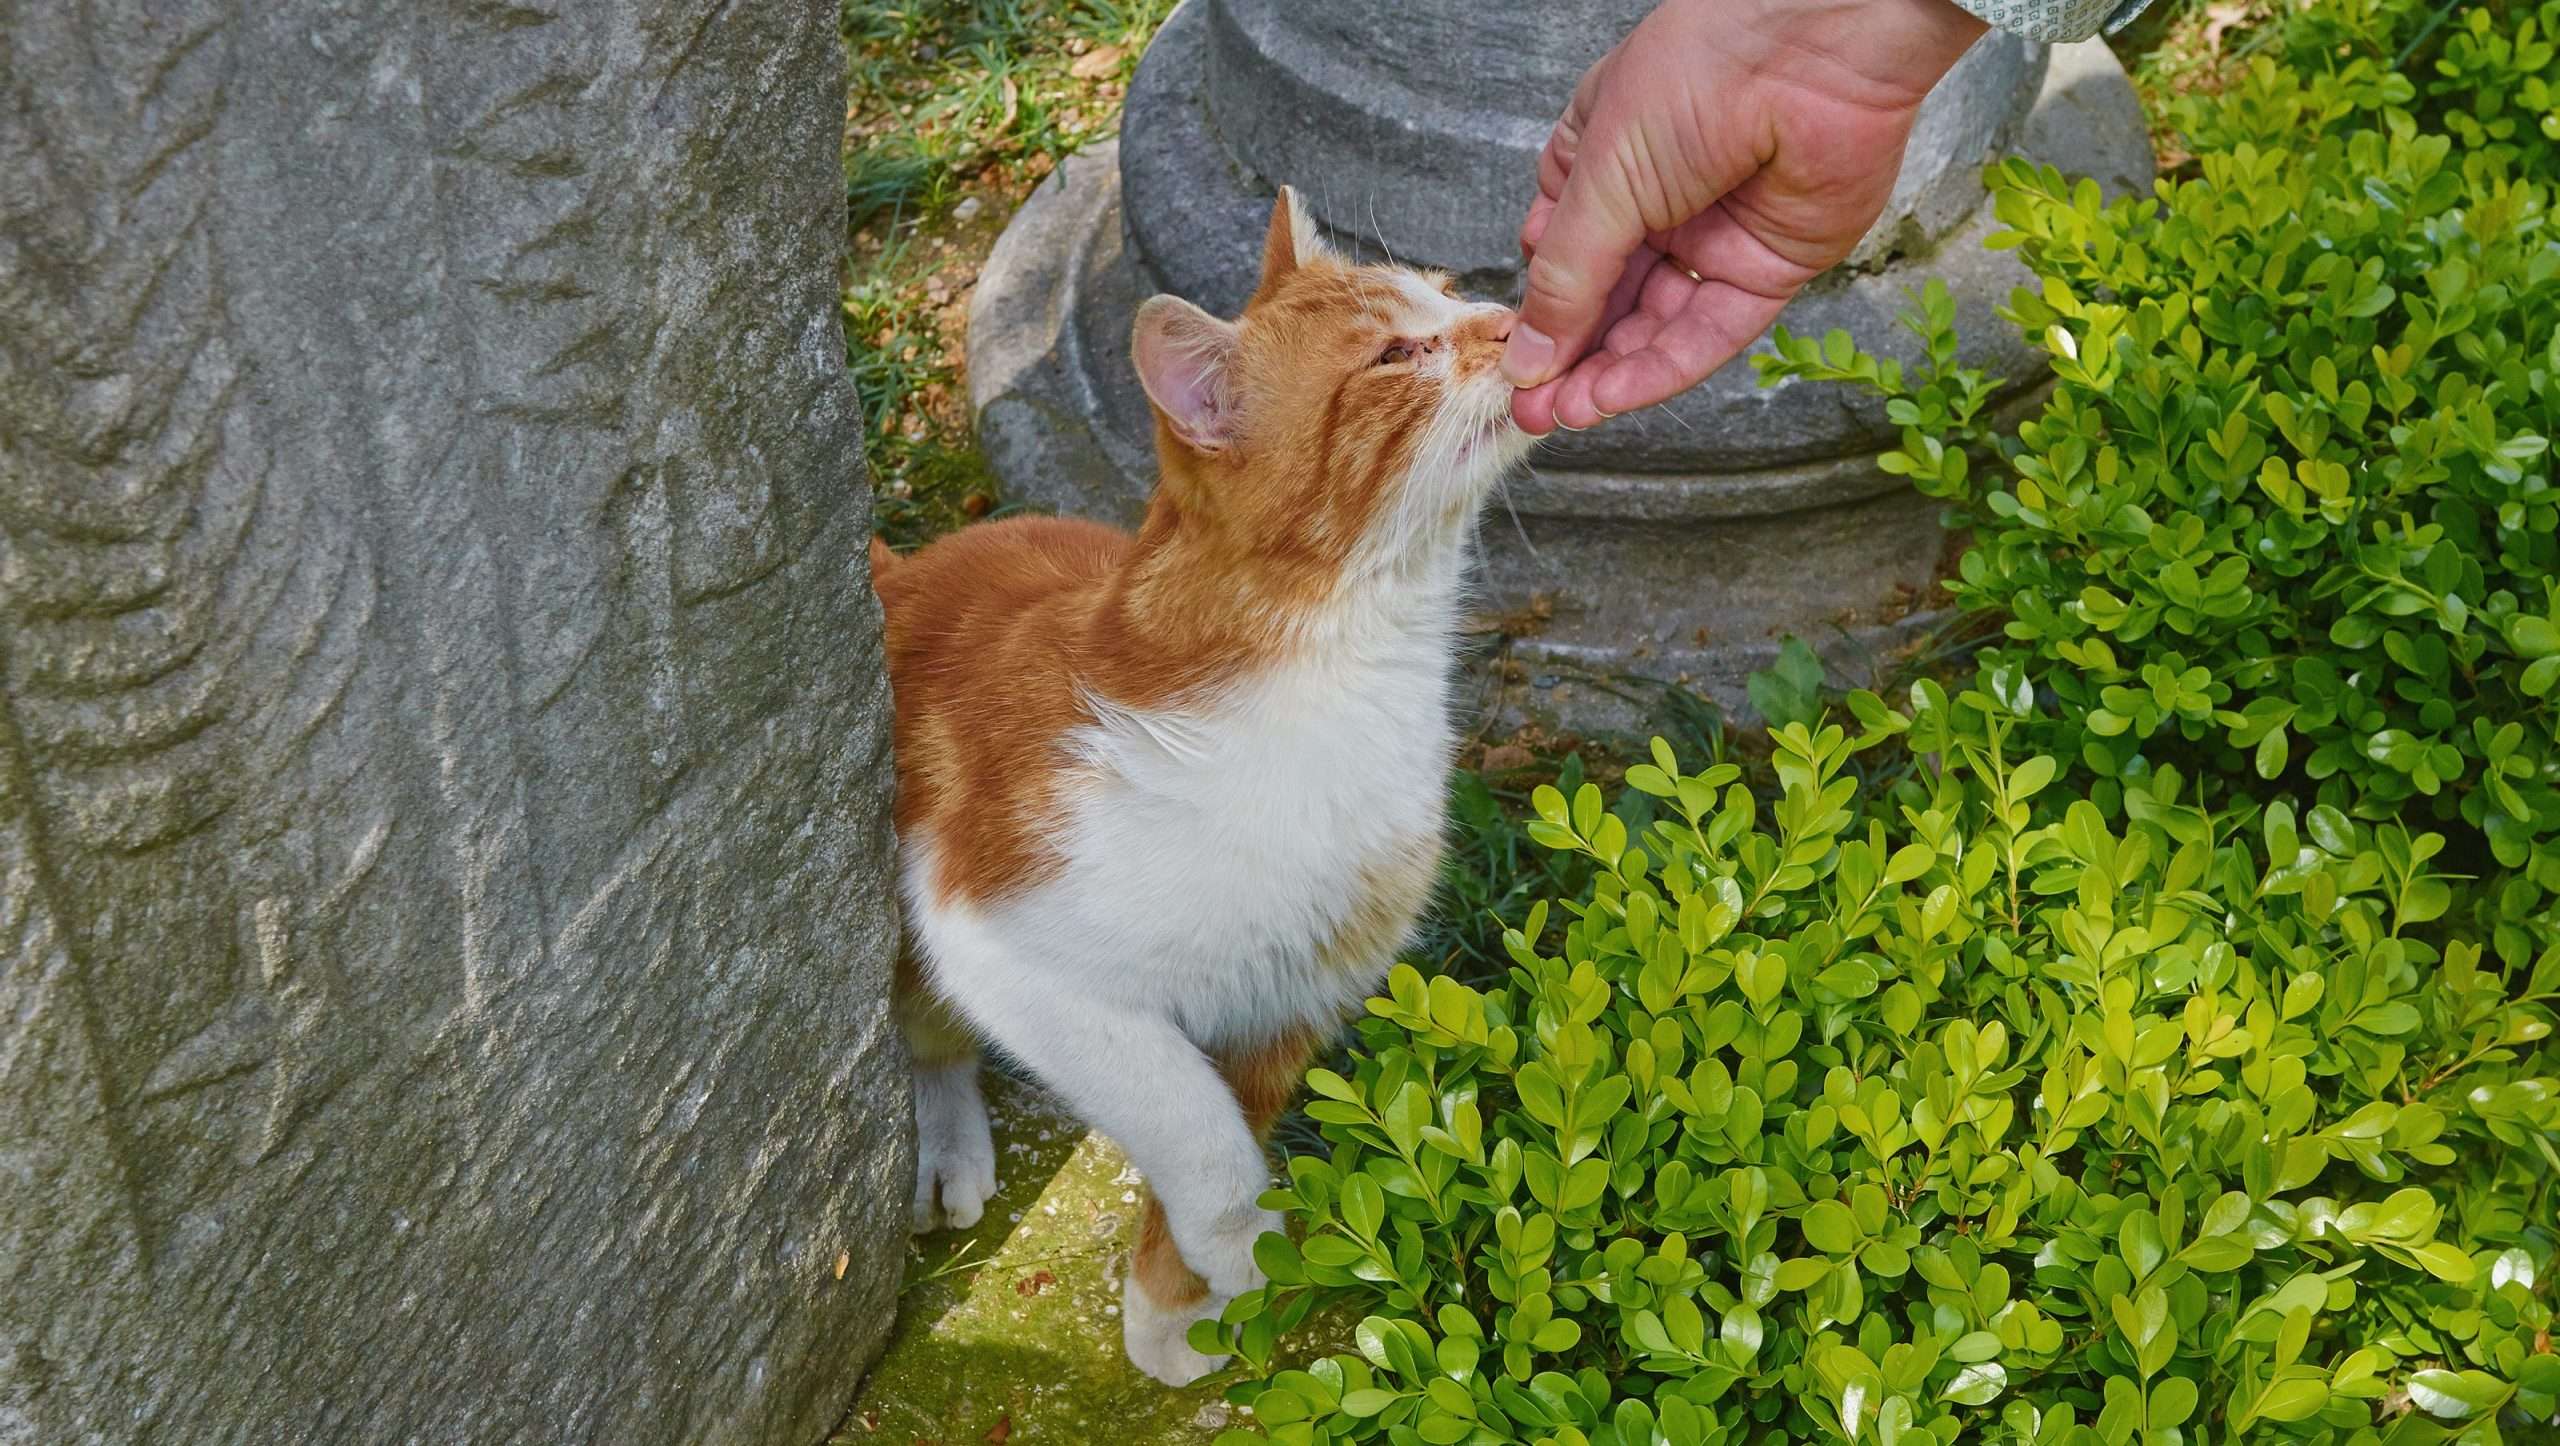 Feeding stray cats, dogs could soon be illegal